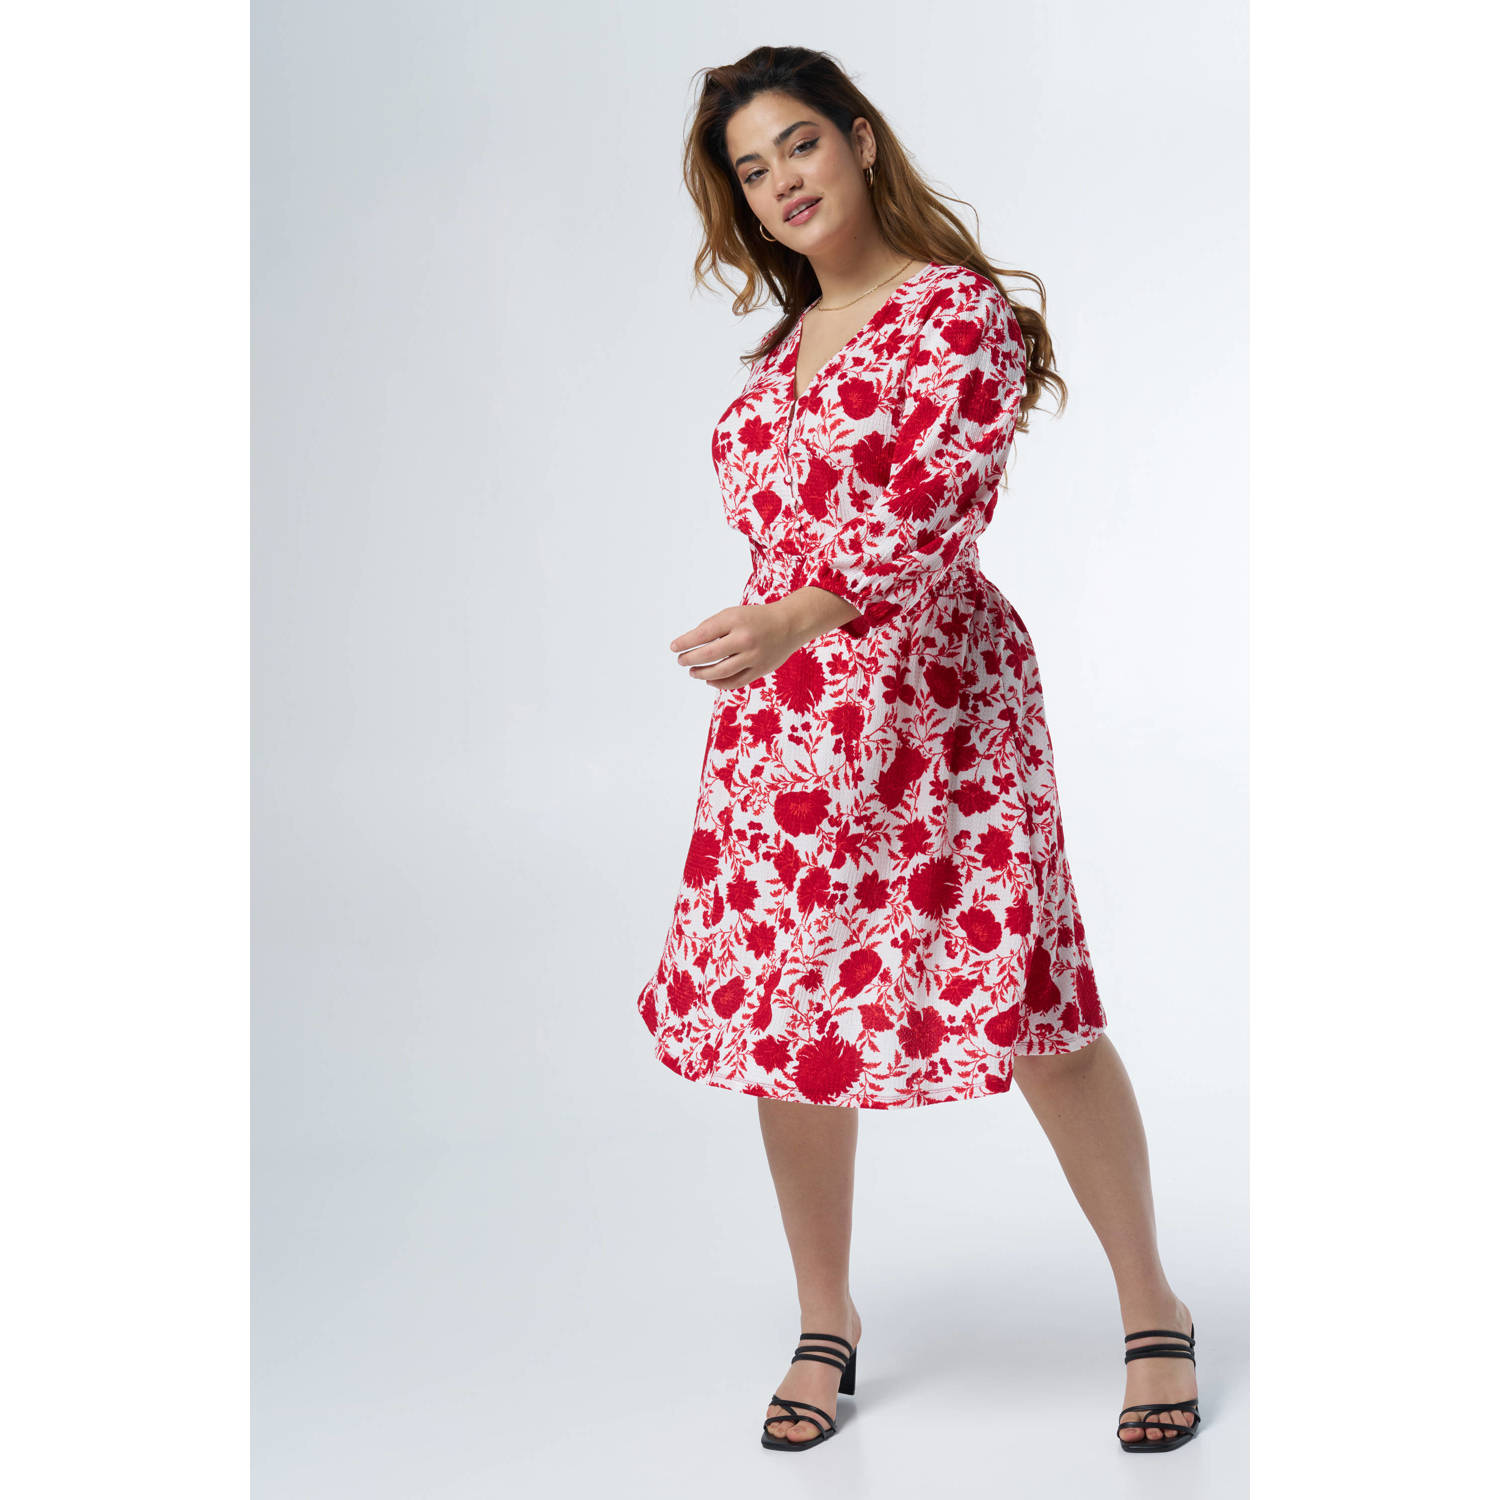 MS Mode jurk met all over print rood wit